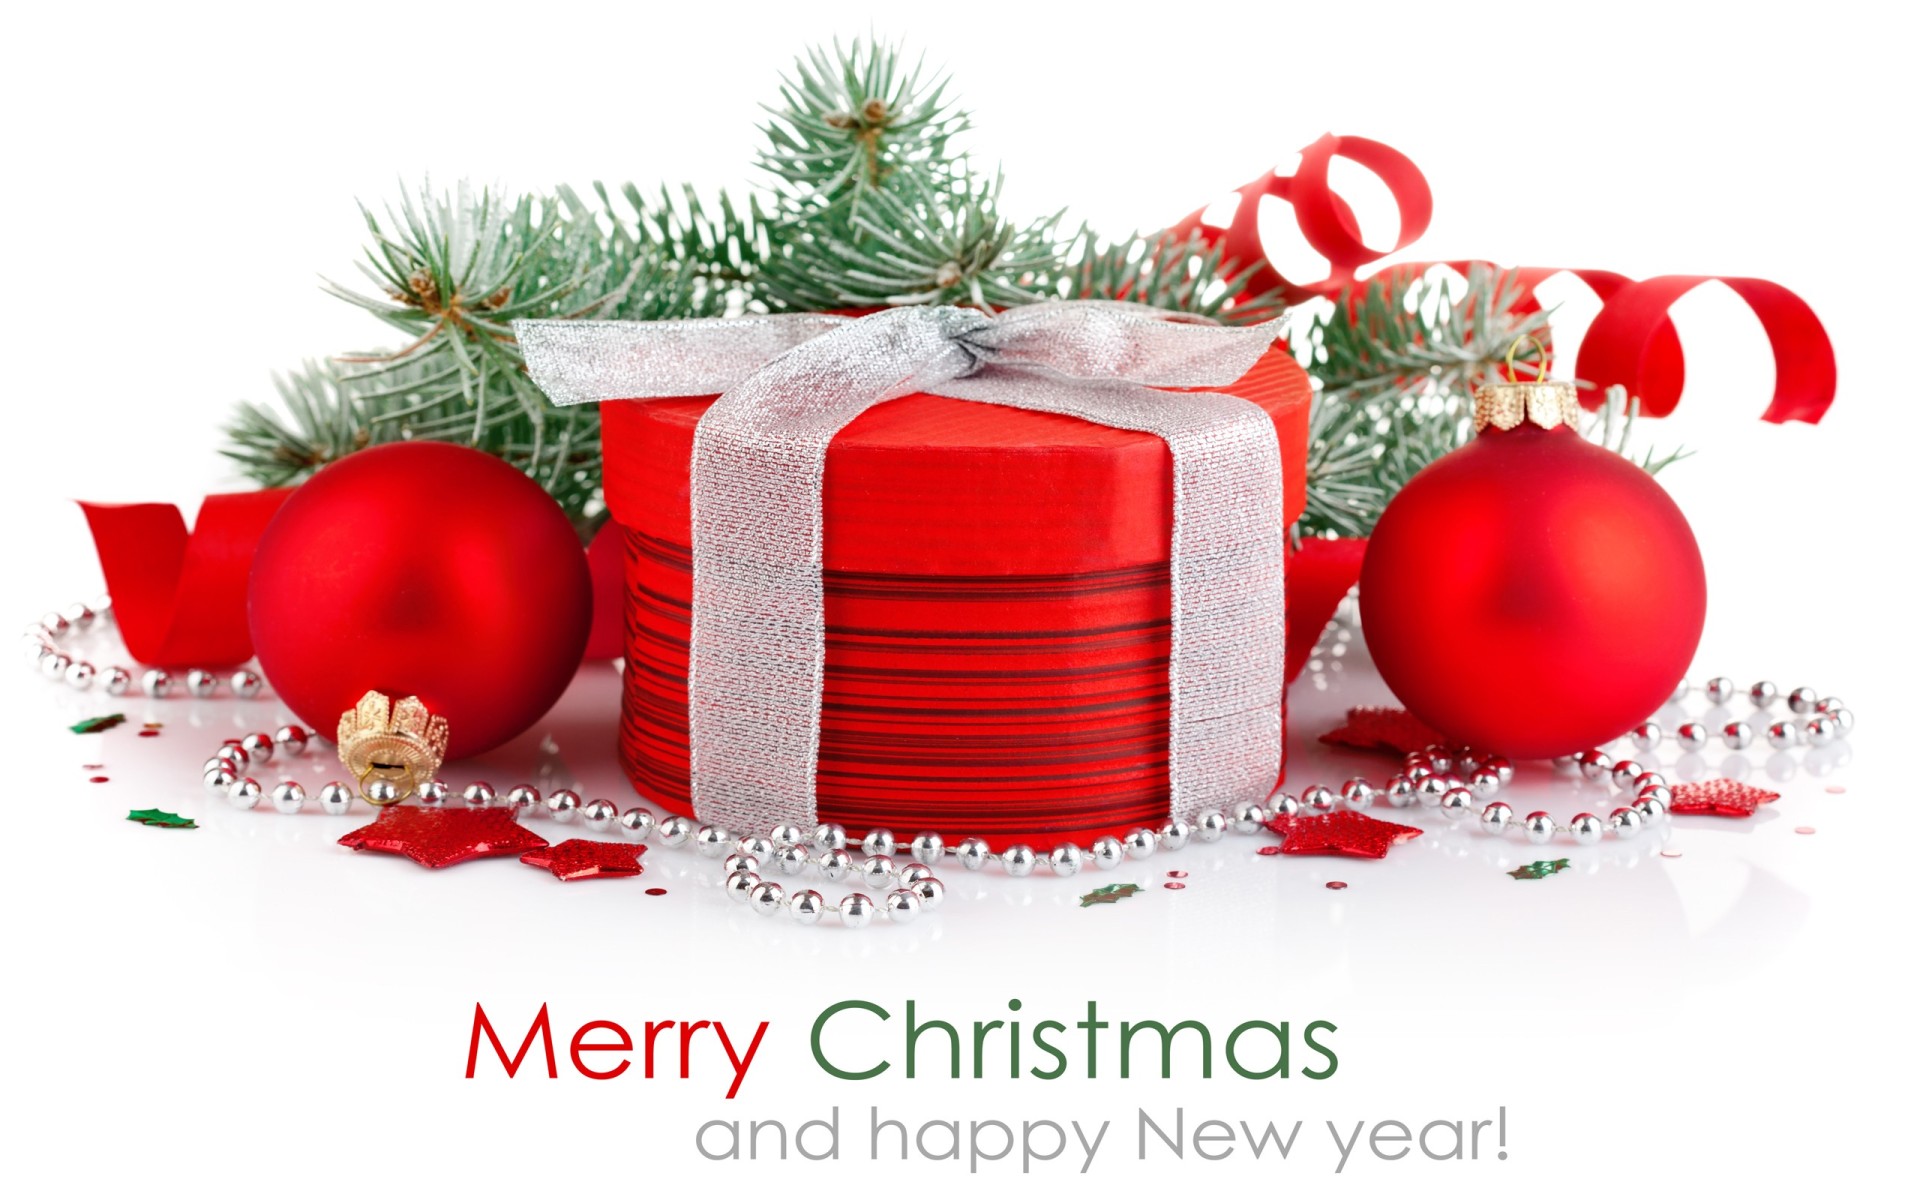 Merry Christmas And Happy New Year Image